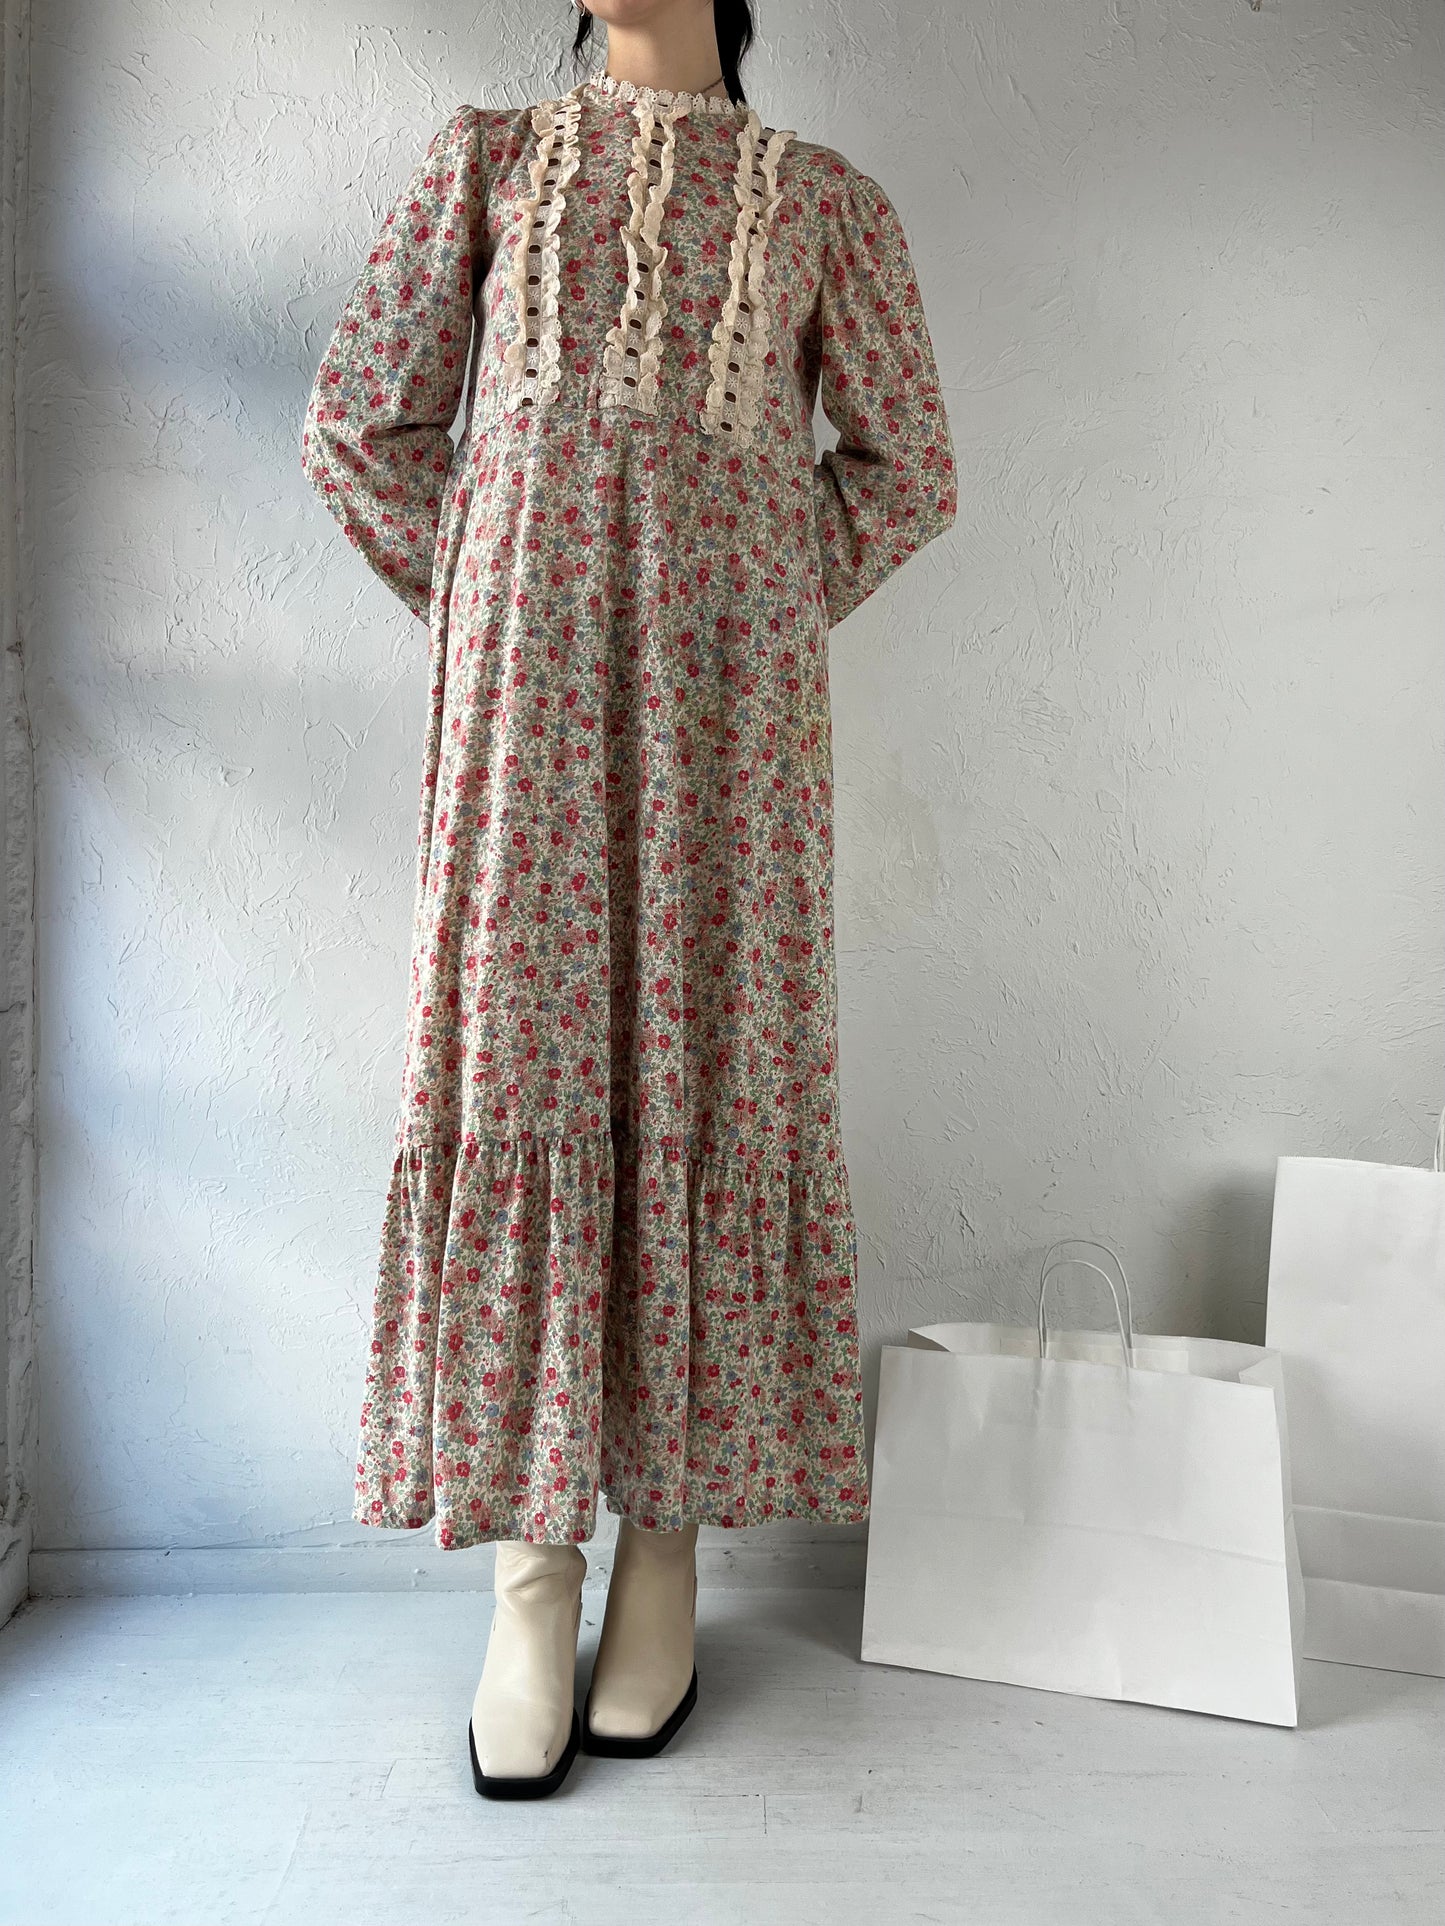 90s Floral Print Long Sleeve Cottage Core Maxi Dress / Small